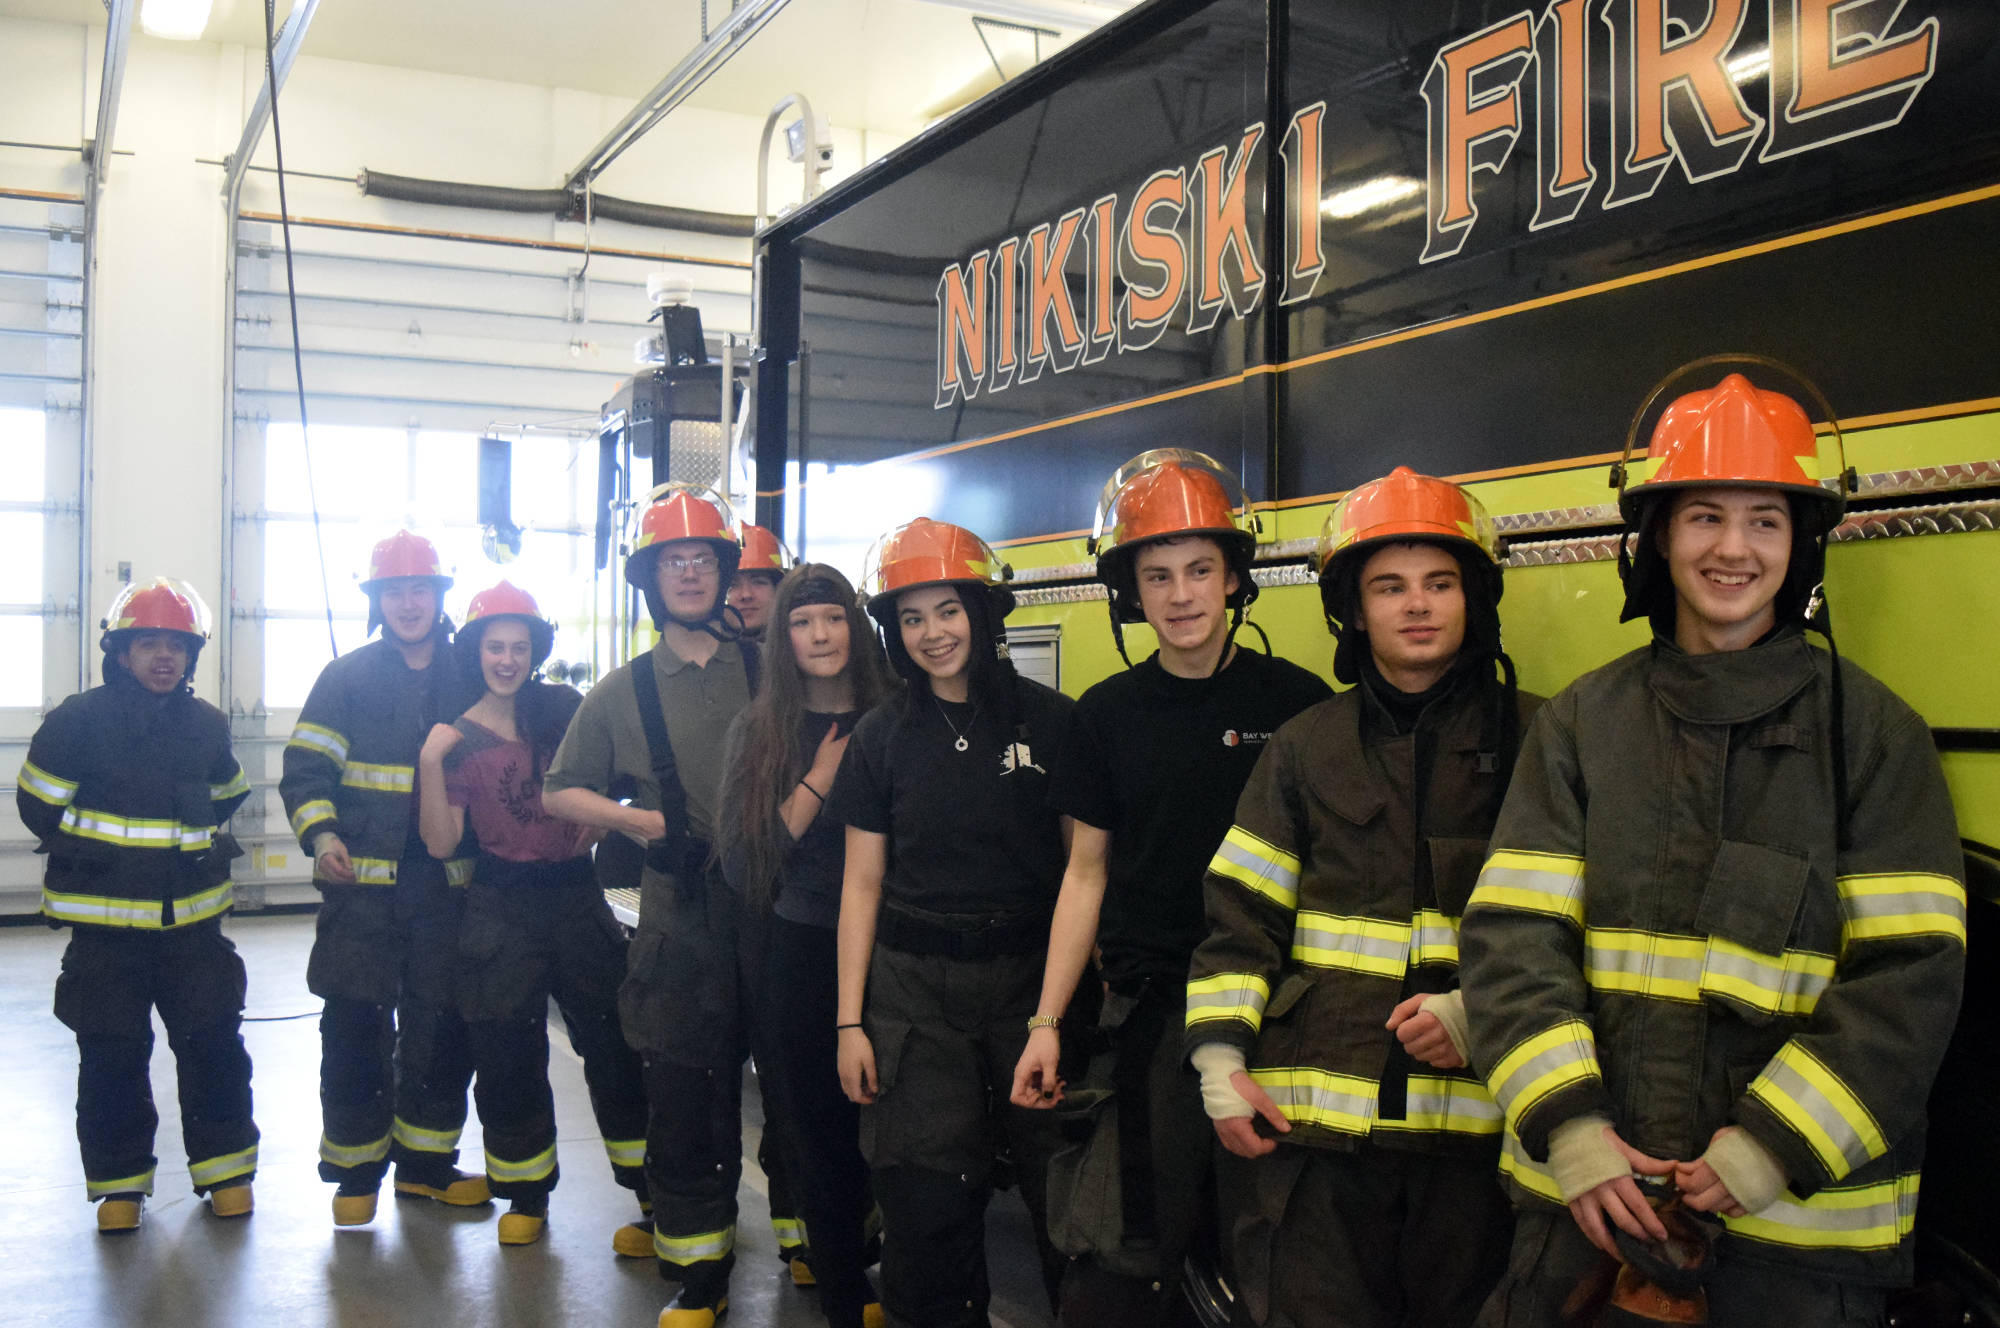 High school students from across the Kenai Peninsula Borough School District wrap up a day of training at Nikiski Fire Station. The group is part of the pilot program, basic firefighter academy, which included a week of training and culminates in the students becoming licensed by the state. (Photo by Kat Sorensen/Peninsula Clarion)